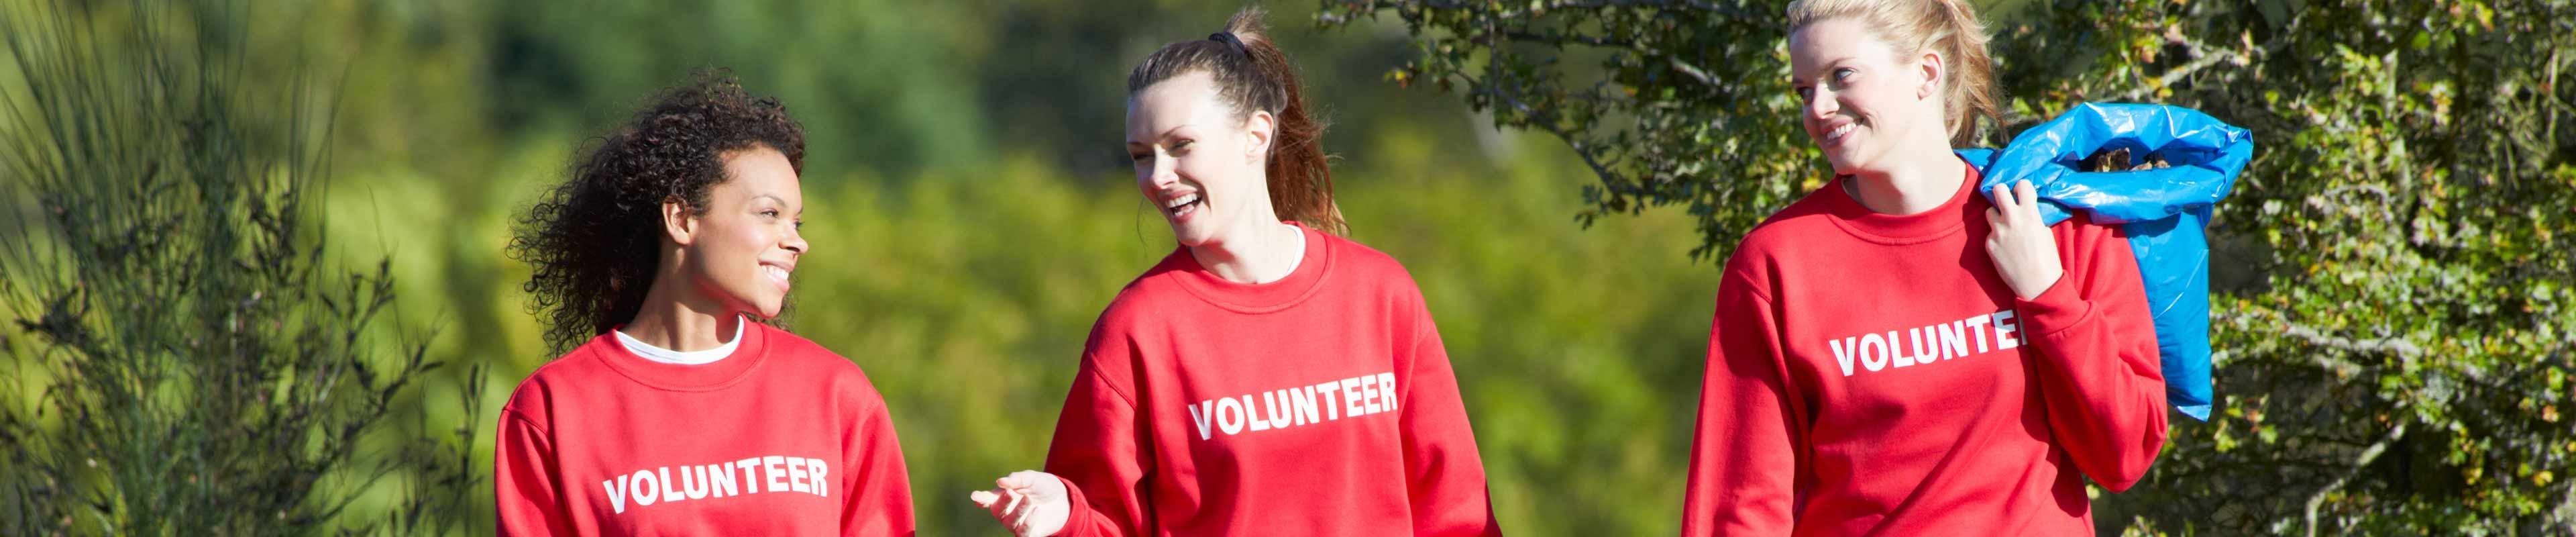 Three woman wearing red crewneck sweaters volunteering at a park.